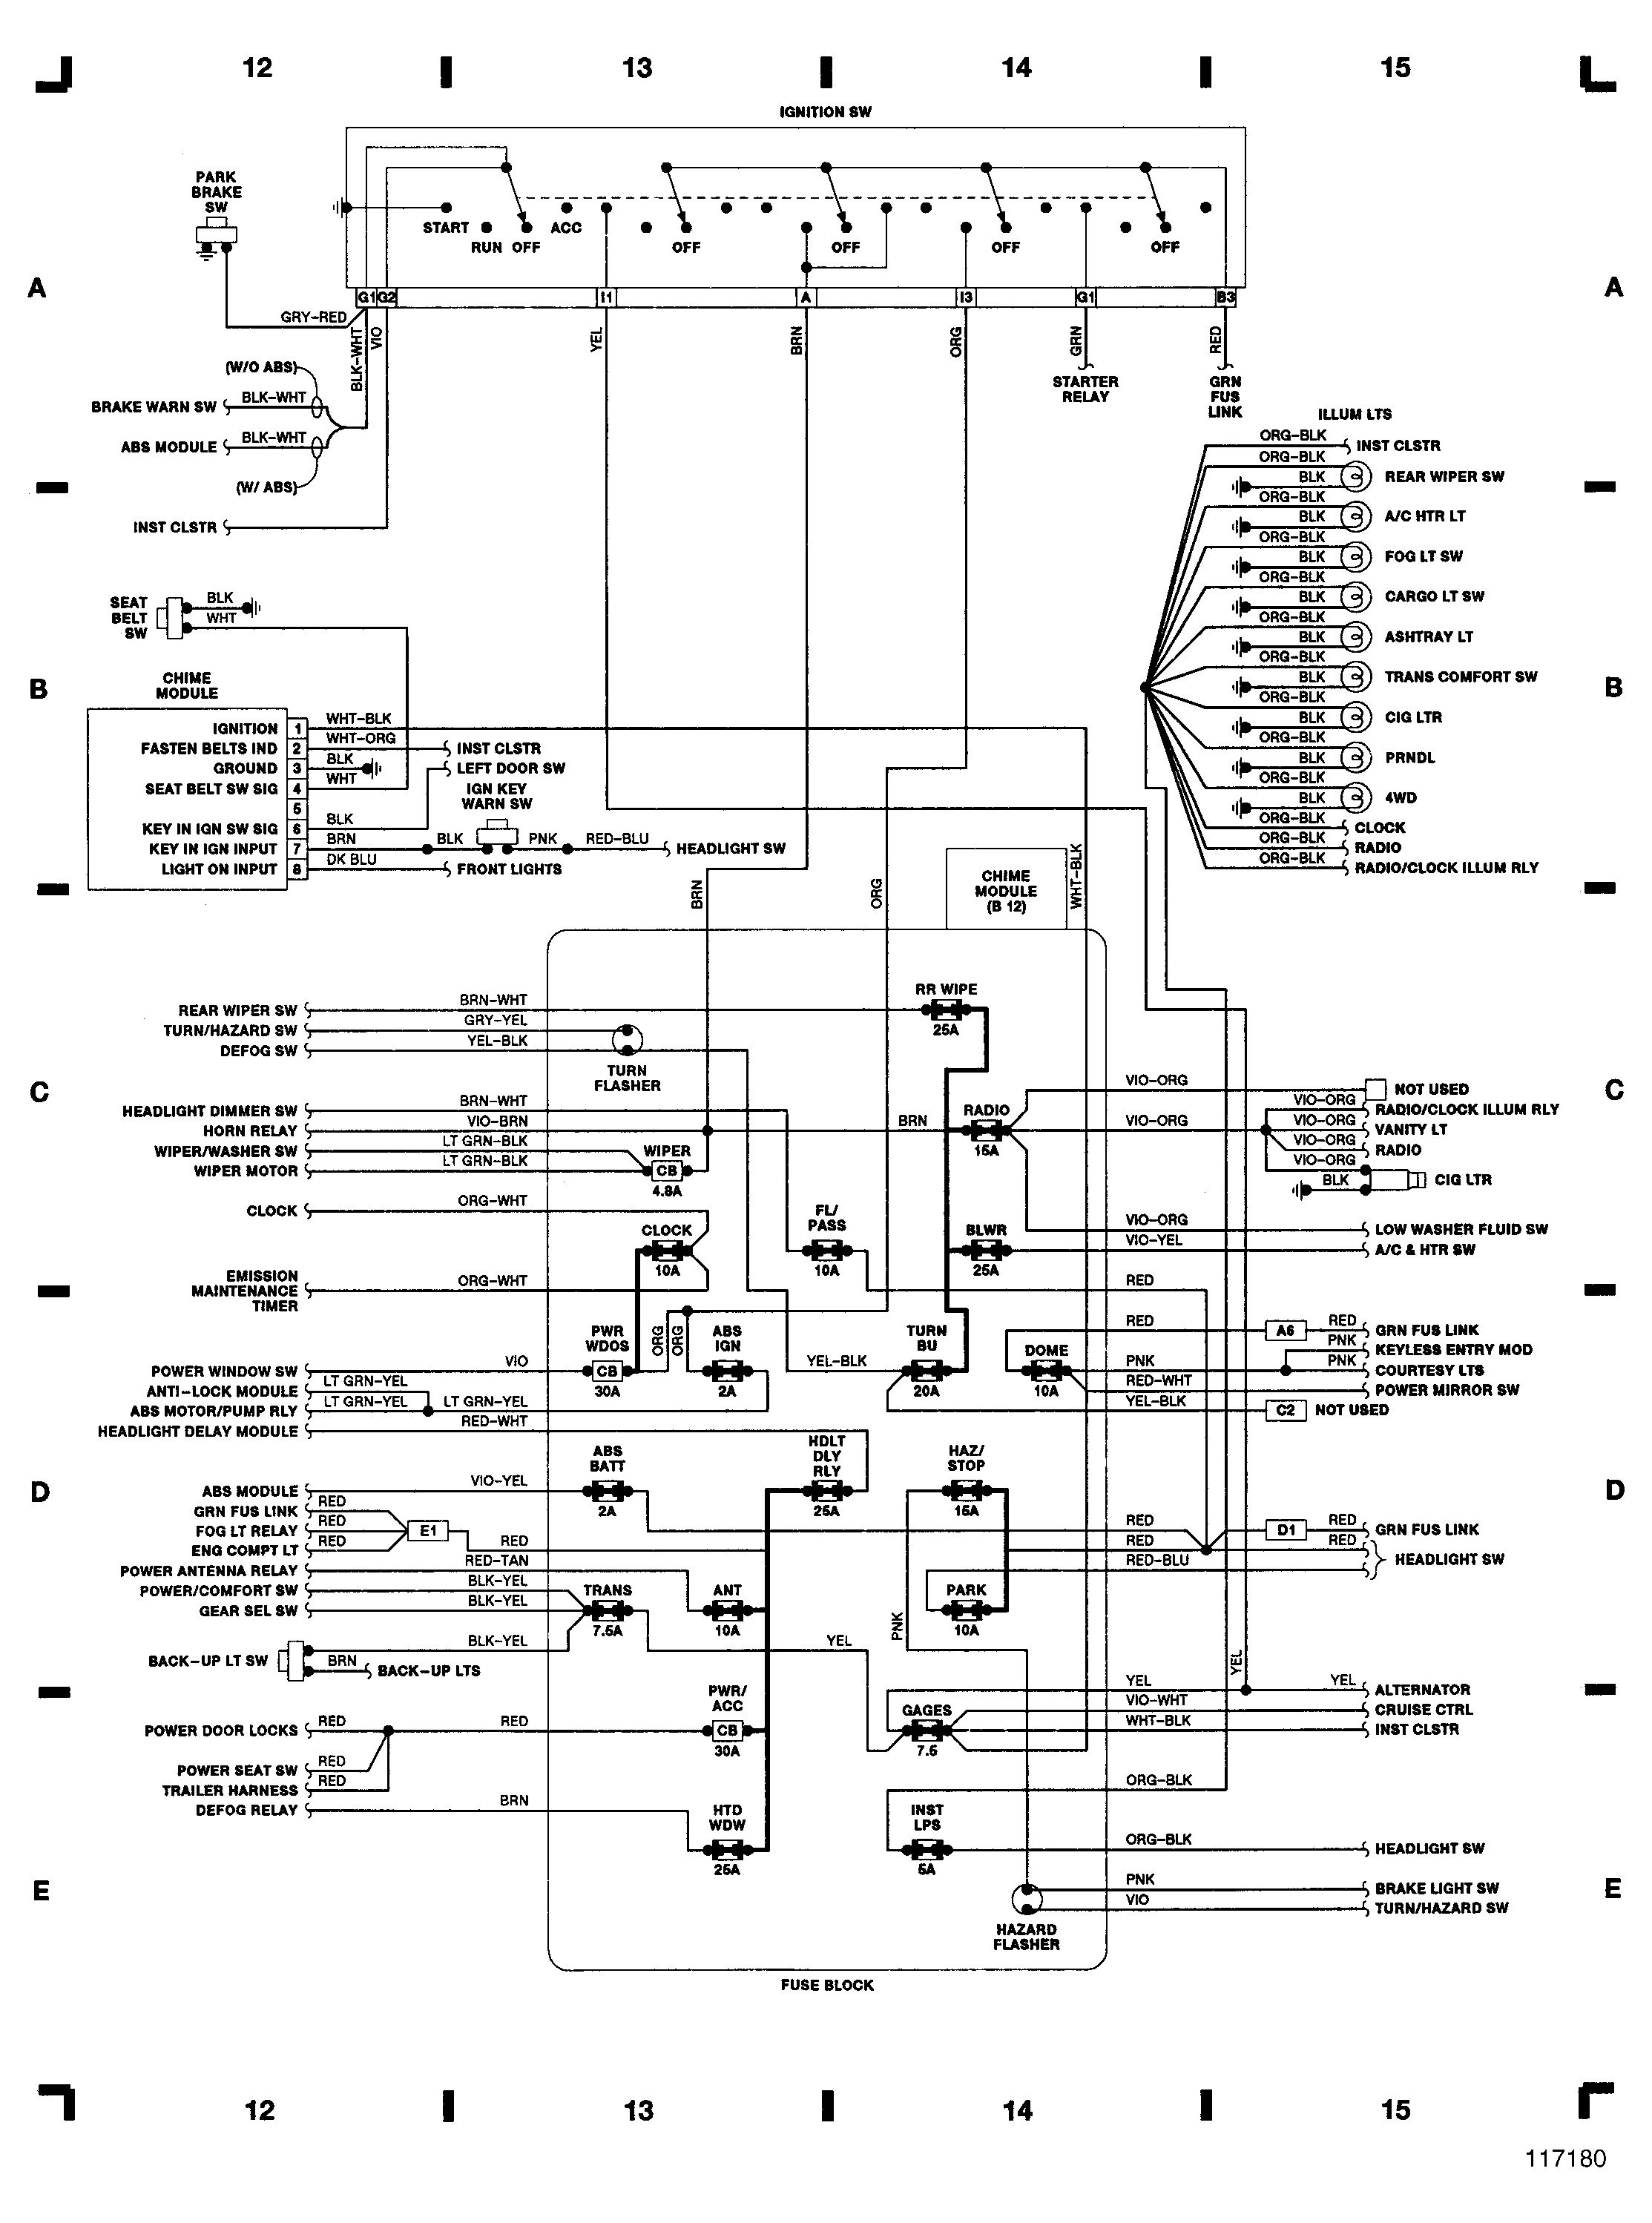 1999 Jeep Cherokee Ignition Wiring Diagram from www.2carpros.com